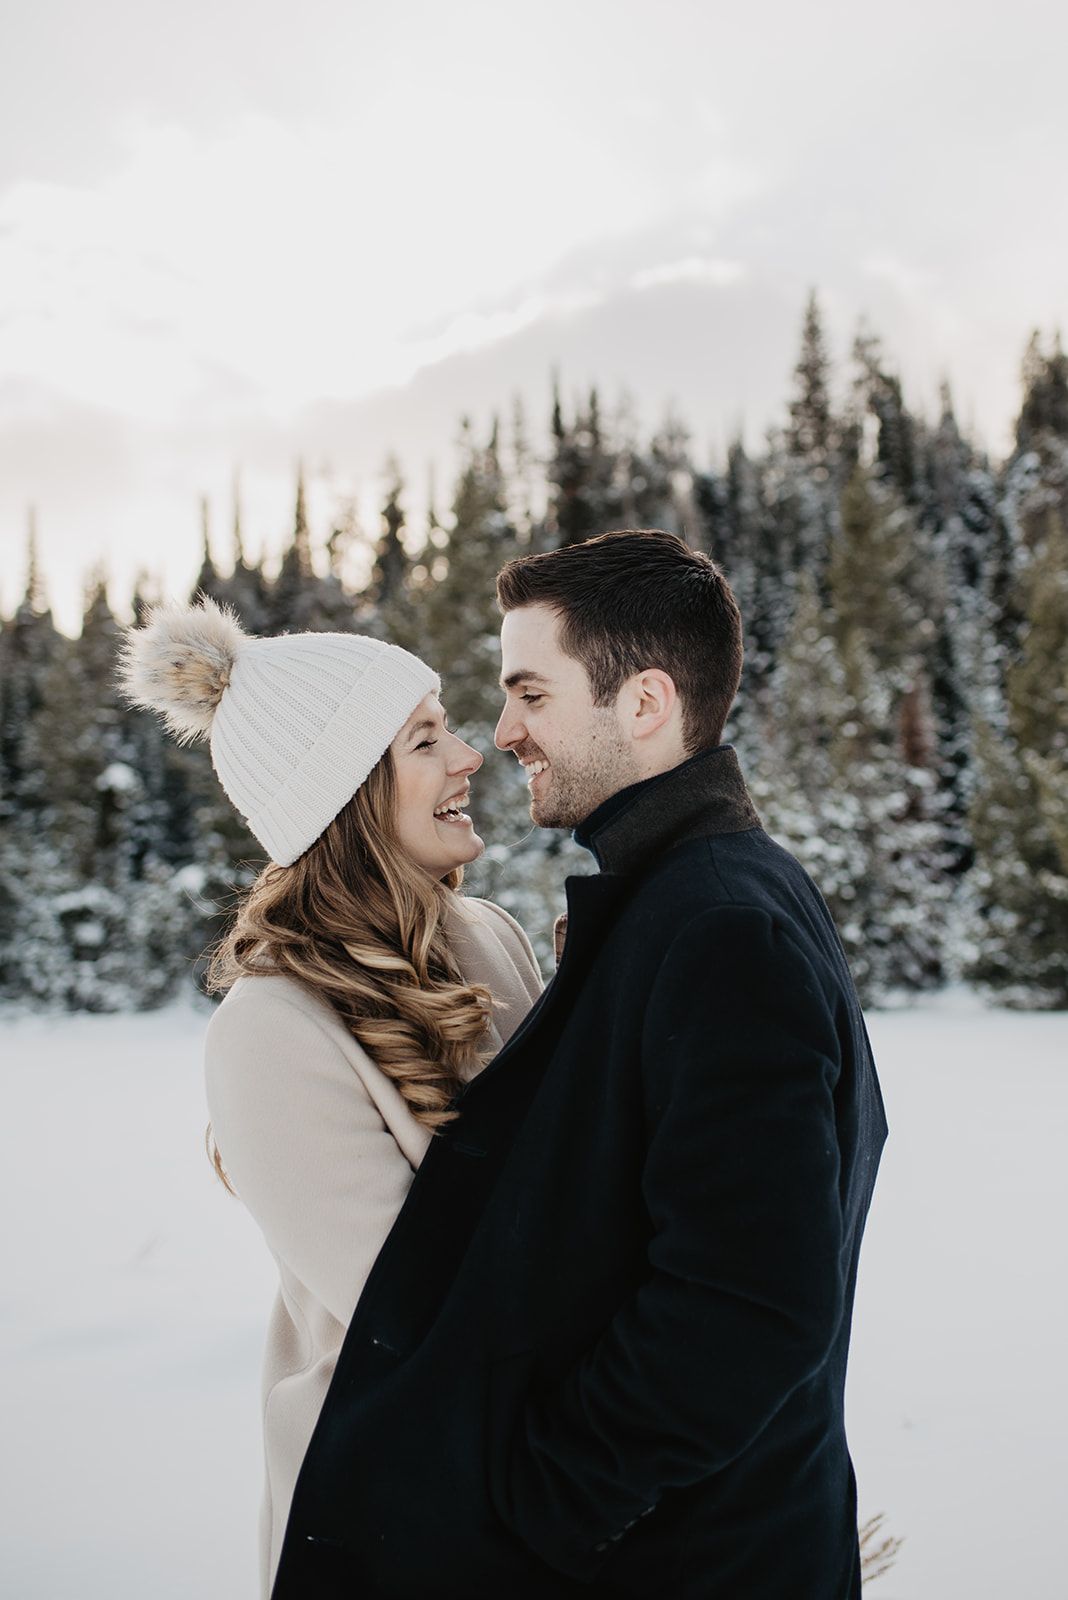 Jackson Hole winter engagement session with man and woman holding each other close while standing in the snow in front of tall green pine trees